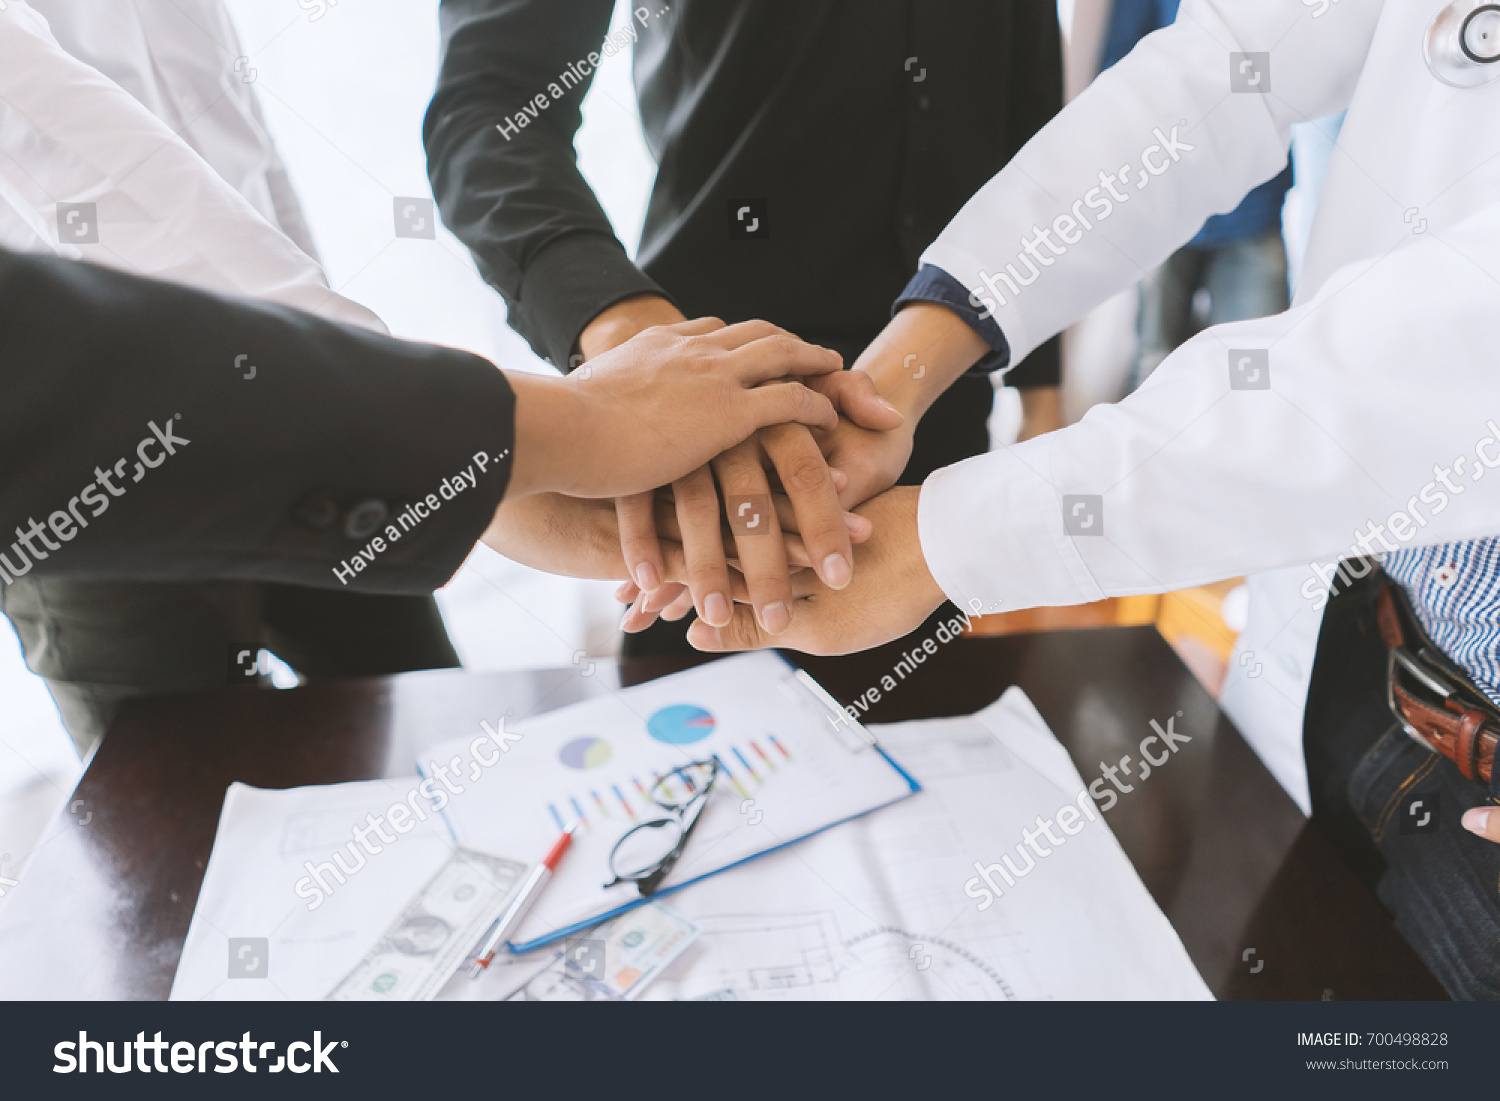 Stock Photo Doctors And Nurses Coordinate Hands Concept Teamwork Happy Doctors Working Together As Team For Jamrai